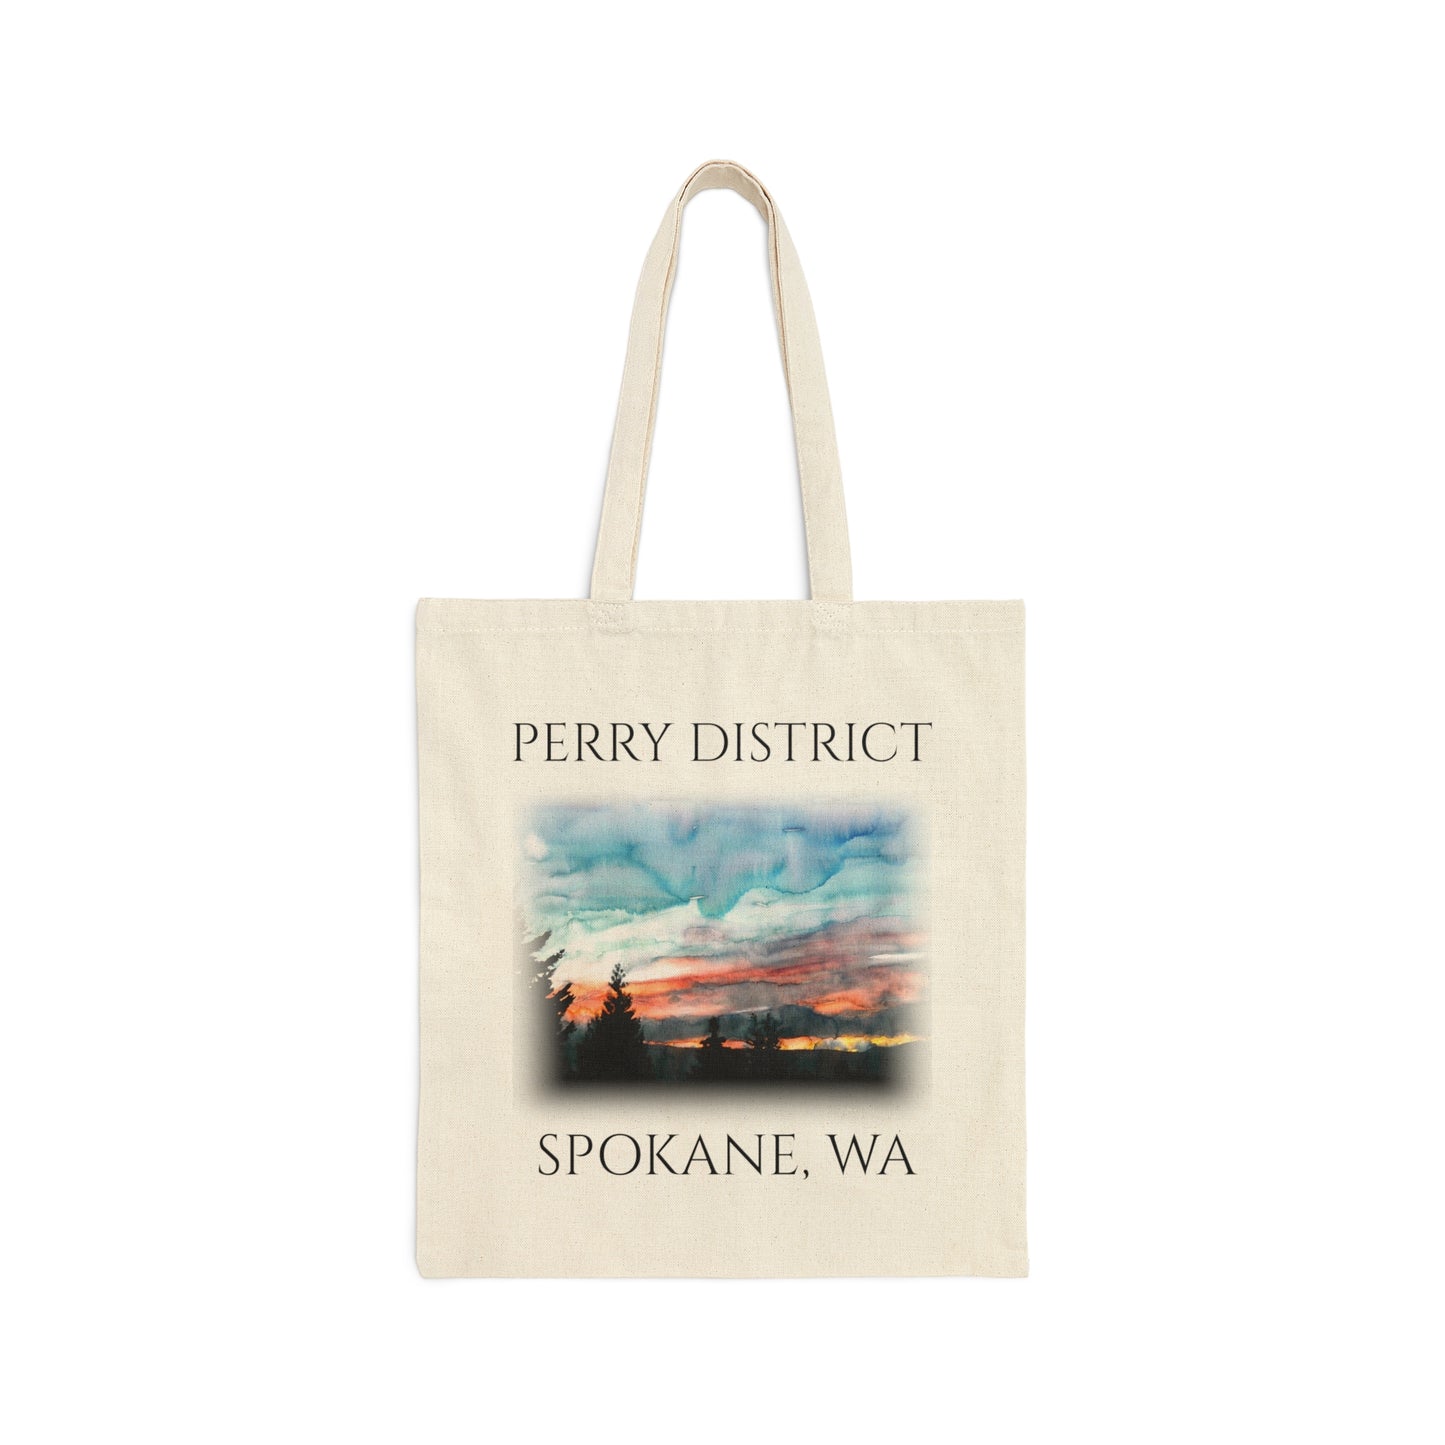 Perry Sunset Tote Bag - Kerry Siderius Art 